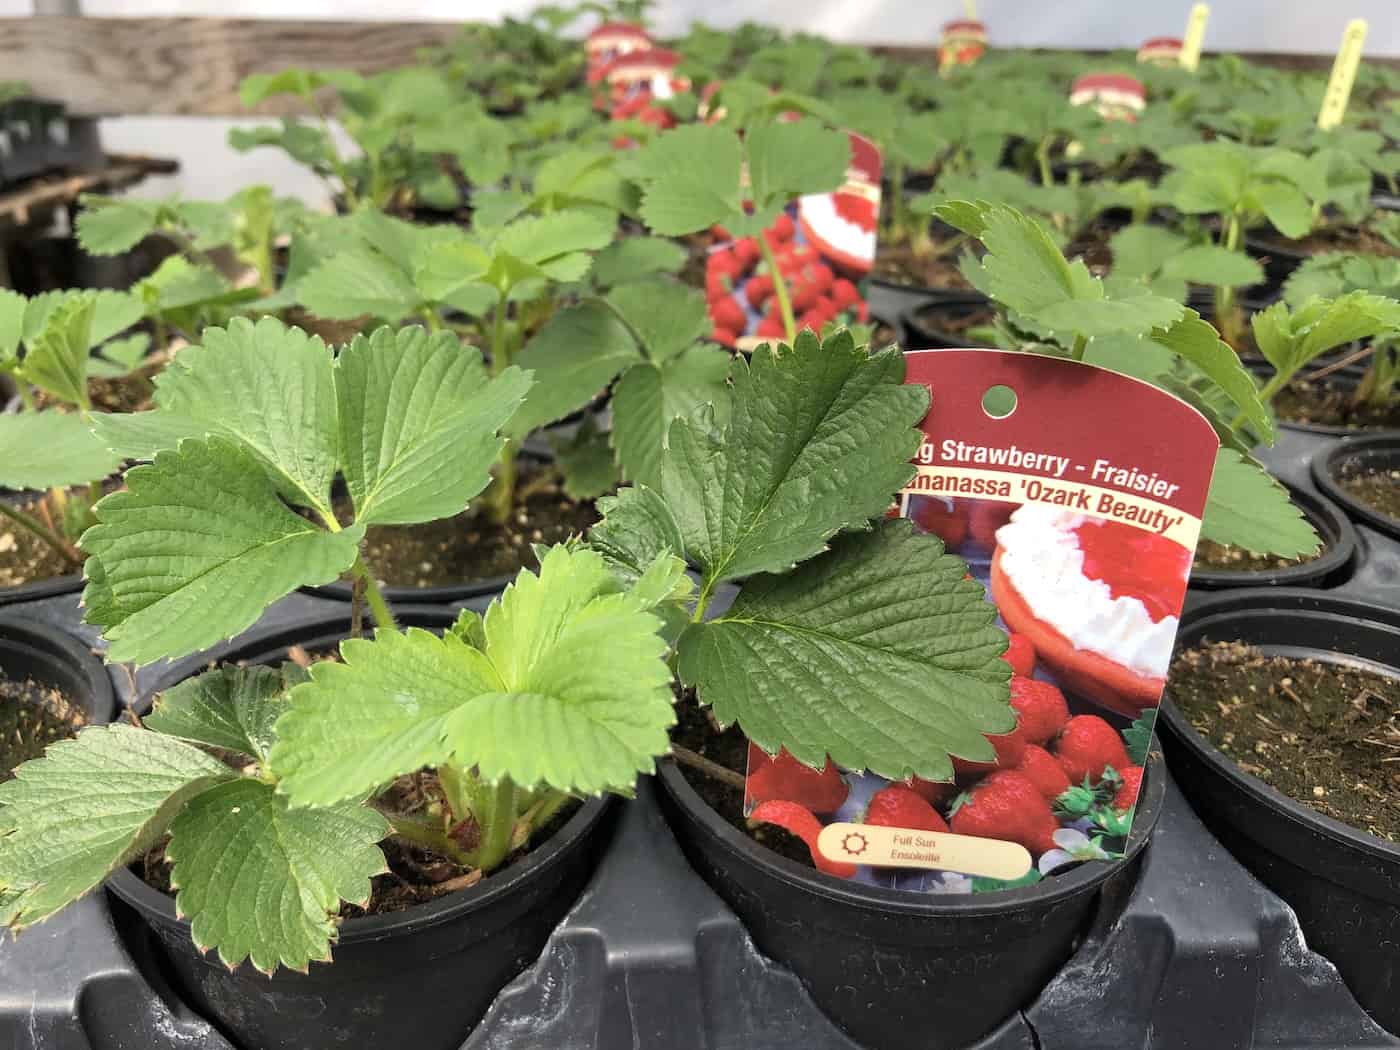 Ozark beauty strawberry plants in pots at the garden center